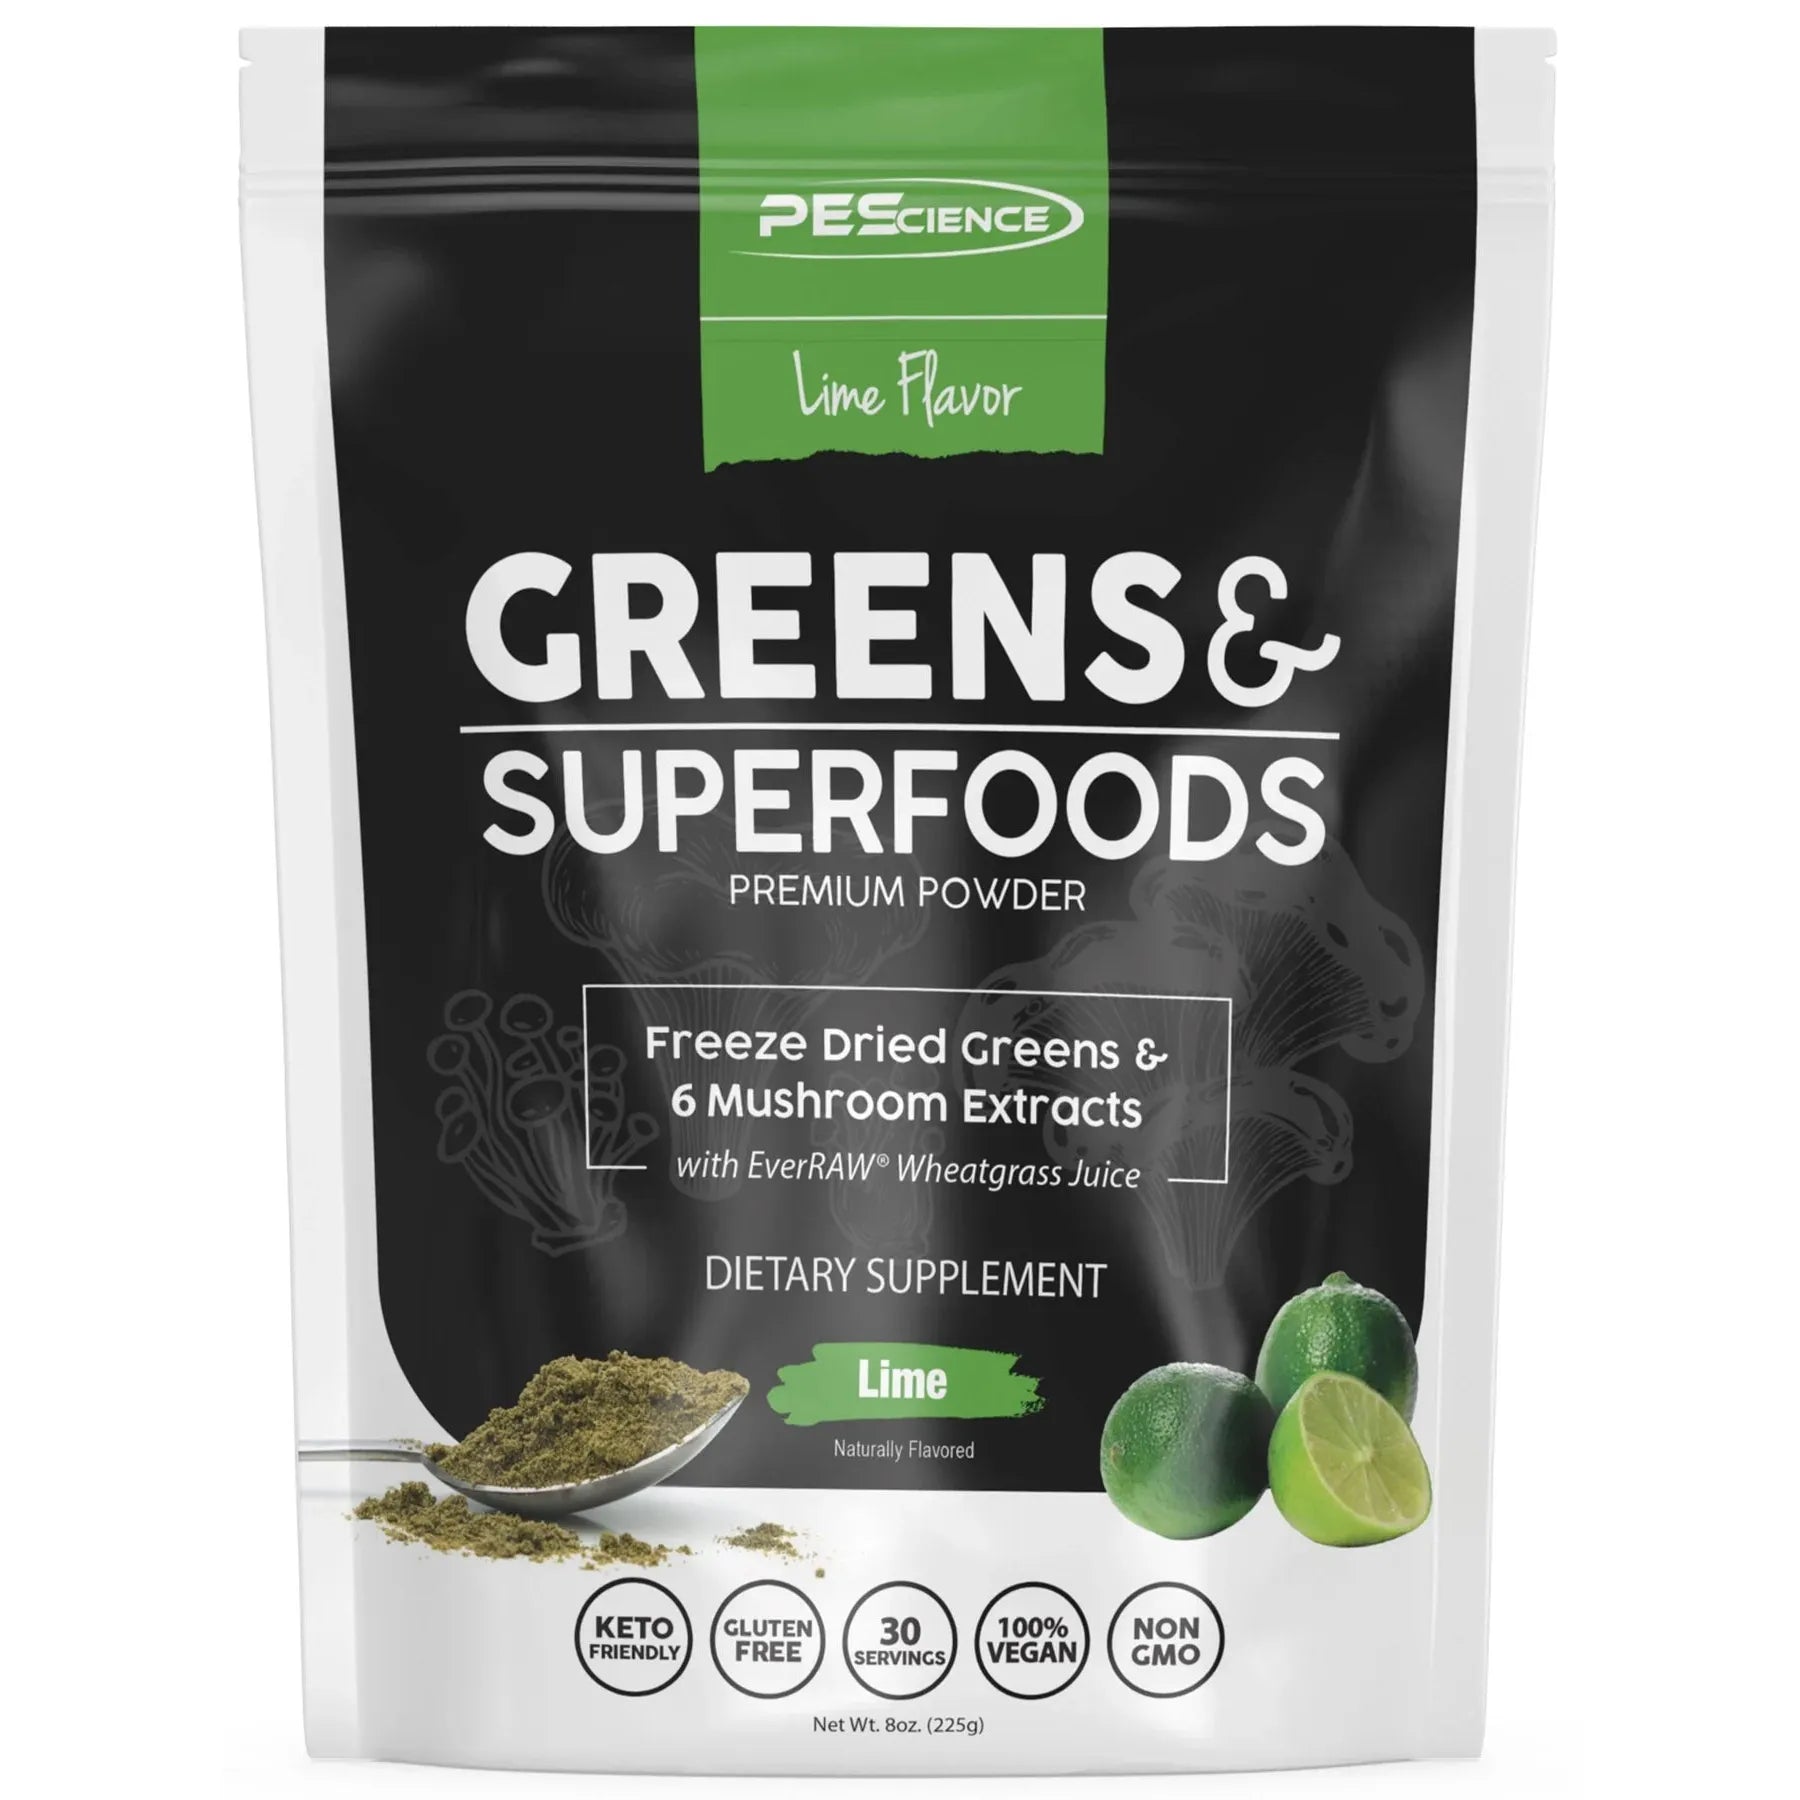 PEScience Greens & More 30 servings PEScience Top Nutrition Canada